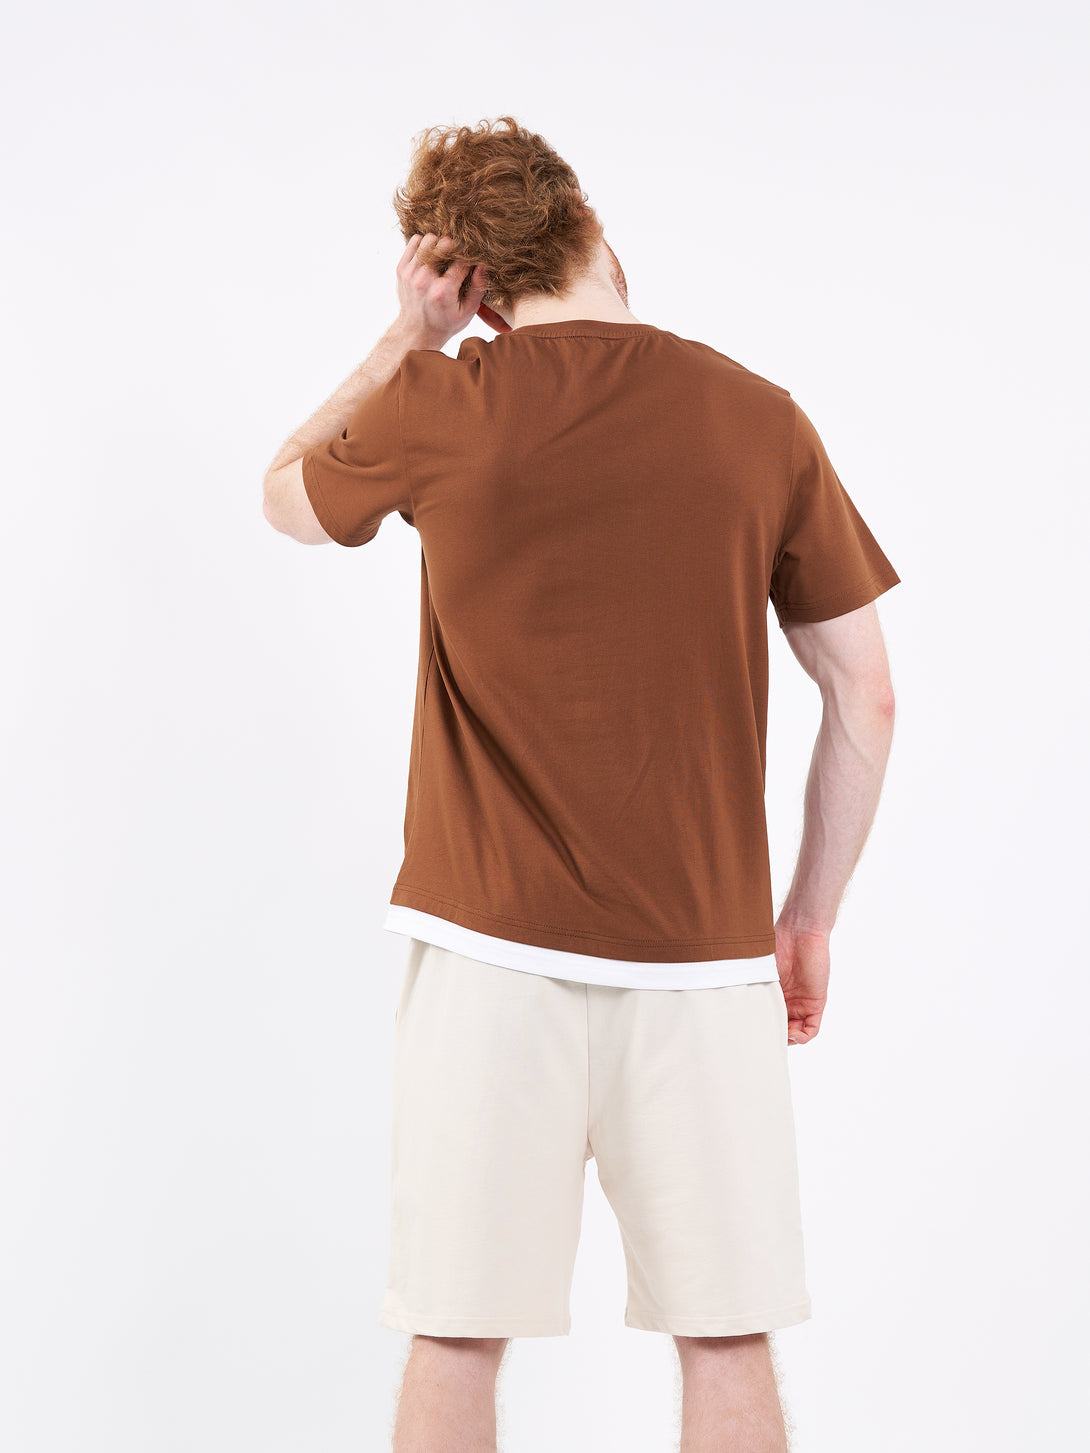 A Man Wearing Toffe Brown Color Men's Layered Heavyweight Crew Neck T-Shirt. Regular Fit